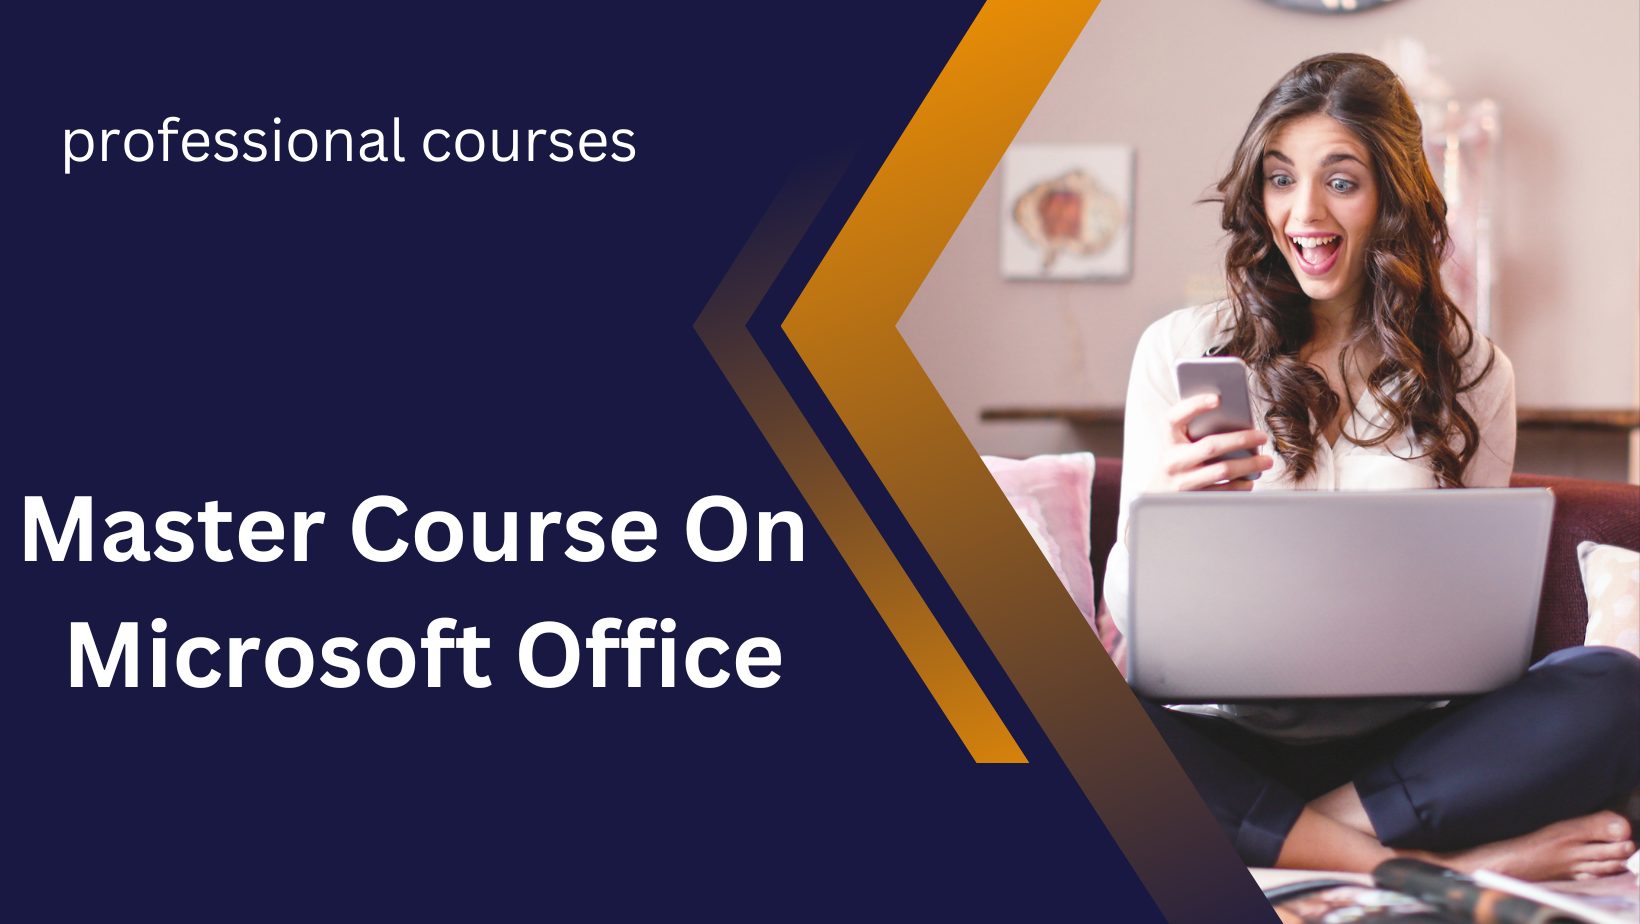 116799Master Course On Microsoft Office